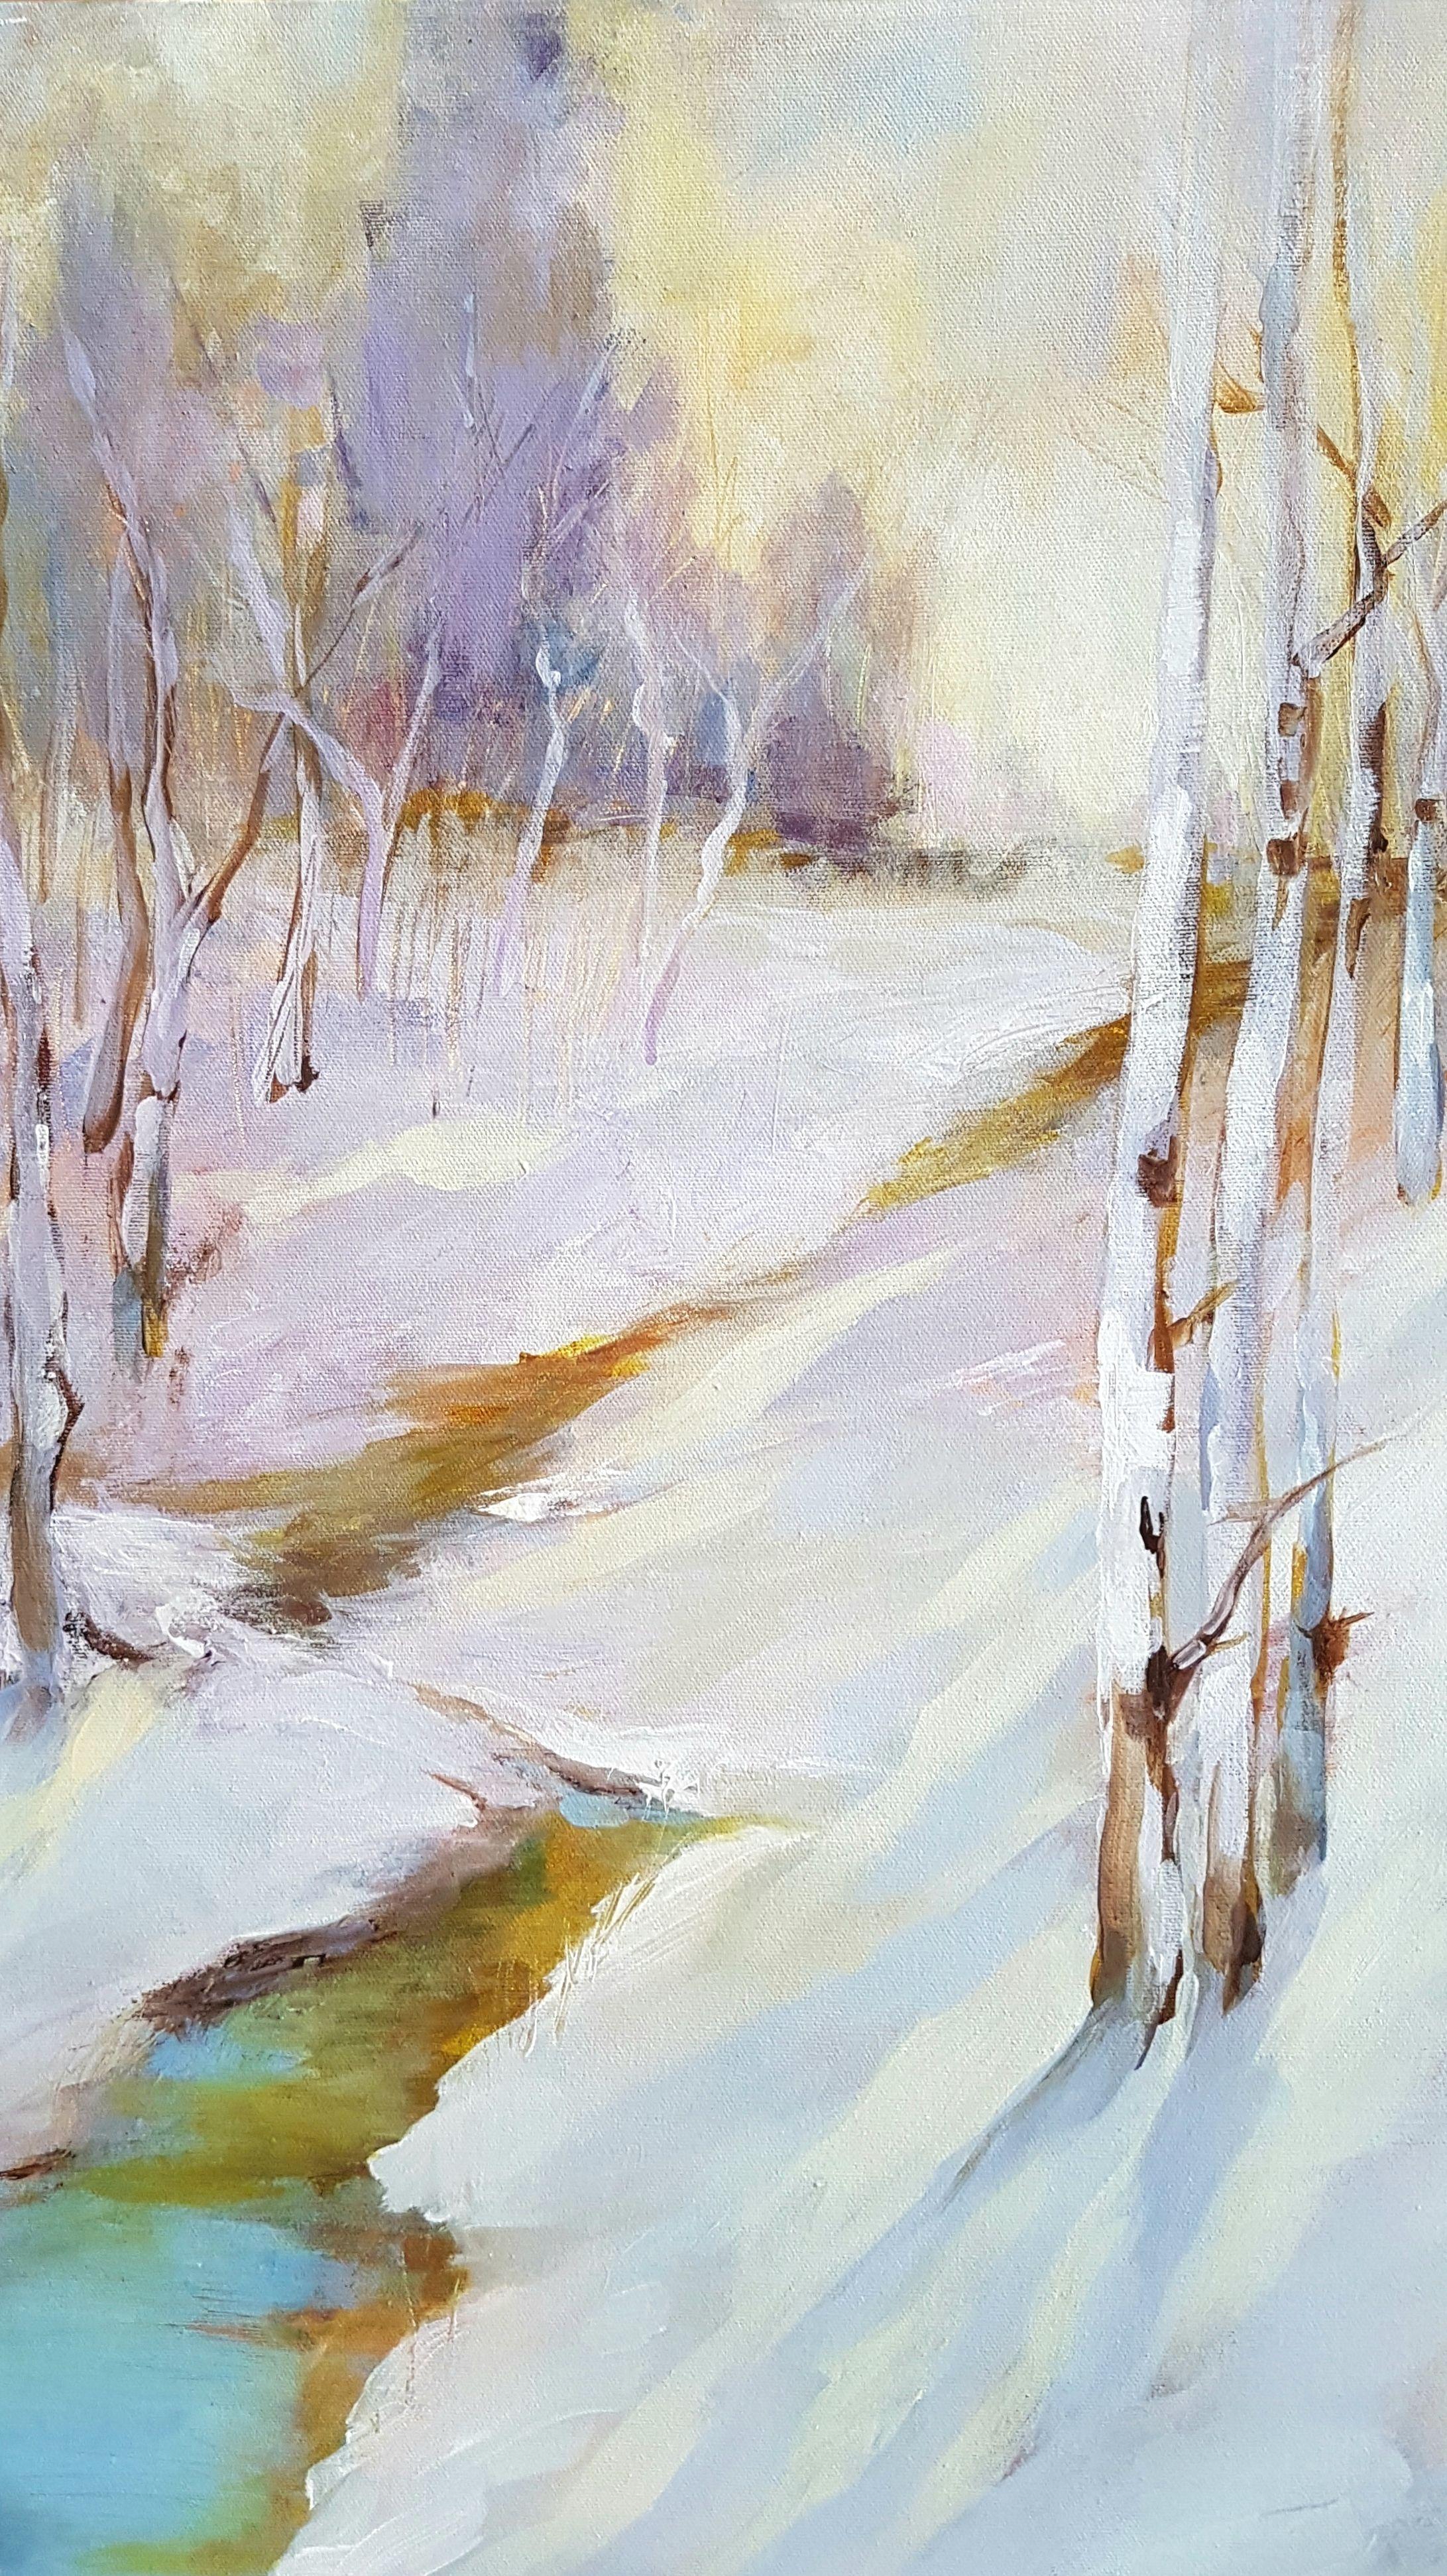 Nothing like a snow covered landscape to encounter those magical moments where the sun streams through the trees. This is a snow scene with a very gentle palette of purples, butter yellow and soft blues. The birch trees are backlit by the morning